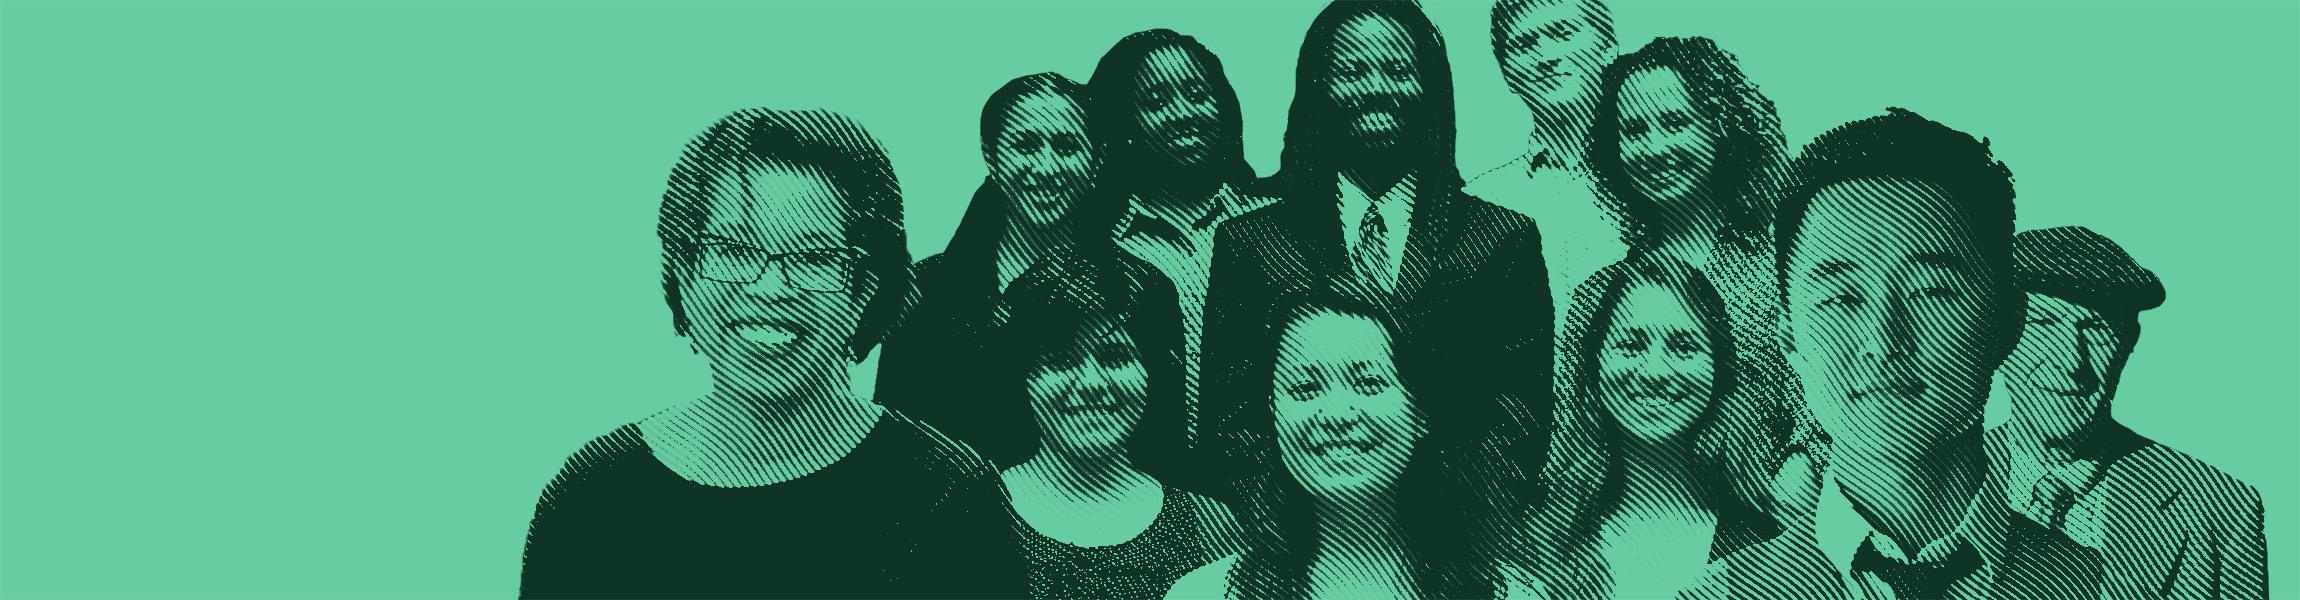 A green-tinted collage of a students, fellows, and faculty of various races, genders, and ages